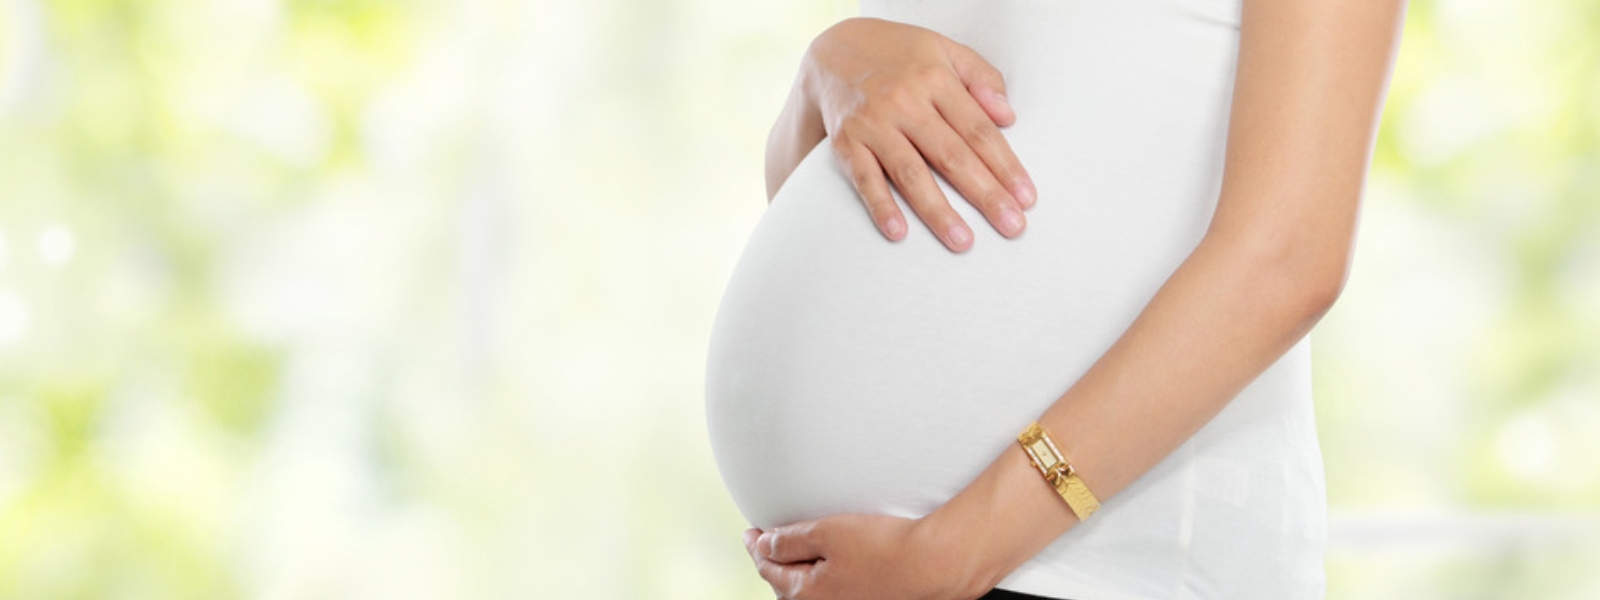 Moderna, Pfizer and AstraZeneca recommended for pregnant women